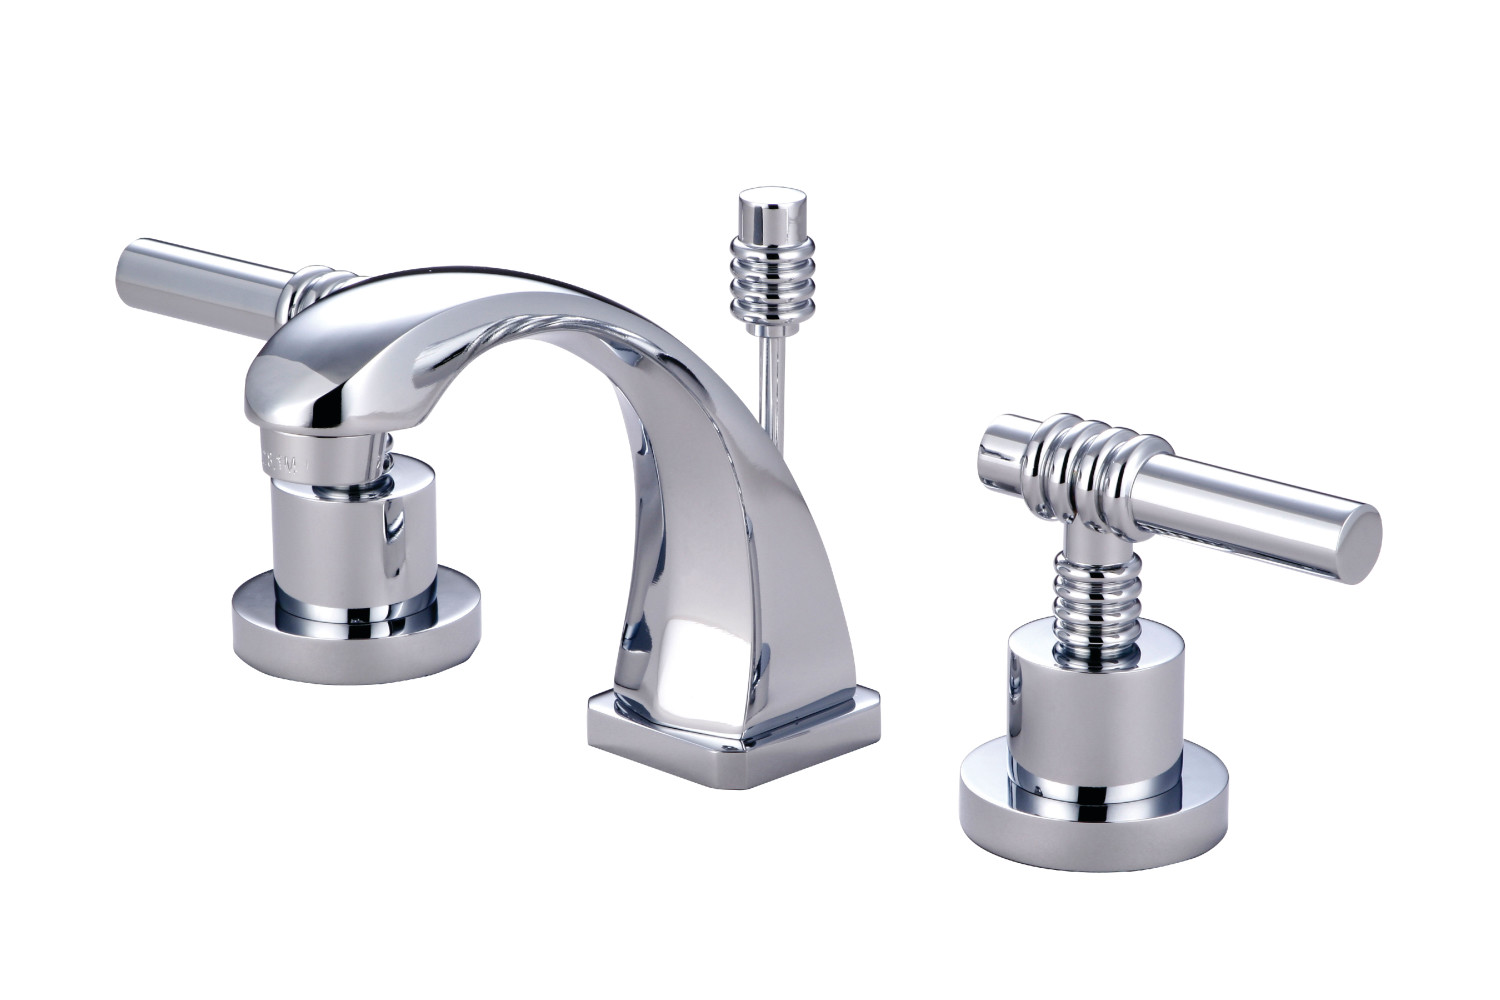 Modern Two-Handle 3-Hole Deck Mounted Widespread Bathroom Faucet in Polished Chrome Finish